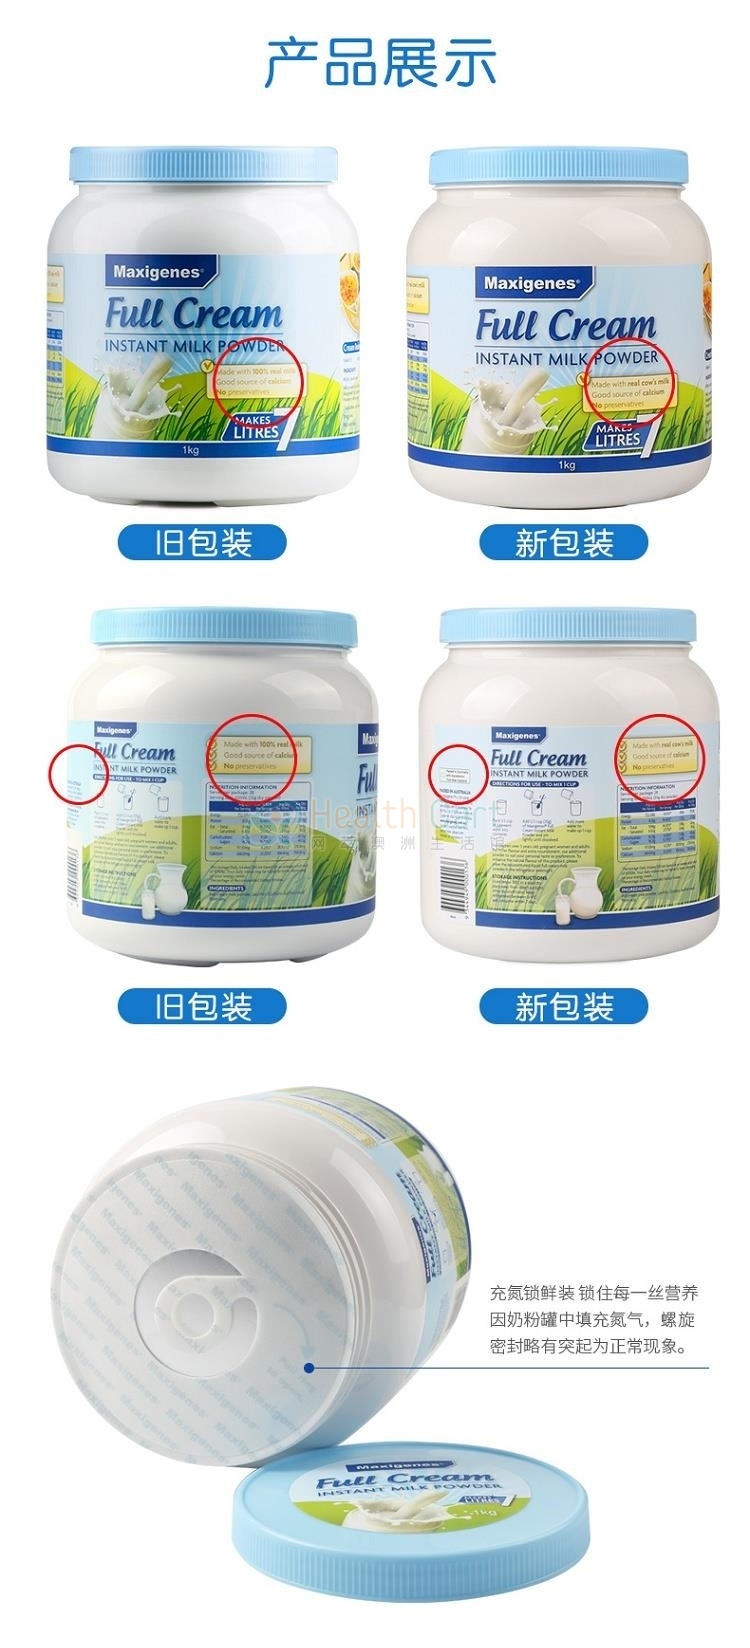 Maxigenes Full Cream Instant Milk Powder 1kg（Ship to Chinese Mainland only，Maximum  6 cans per order） - @maxigenes full cream instant milk powder 1kgship to chinese mainland onlymaximum 6 cans per order - 9 - Health Cart